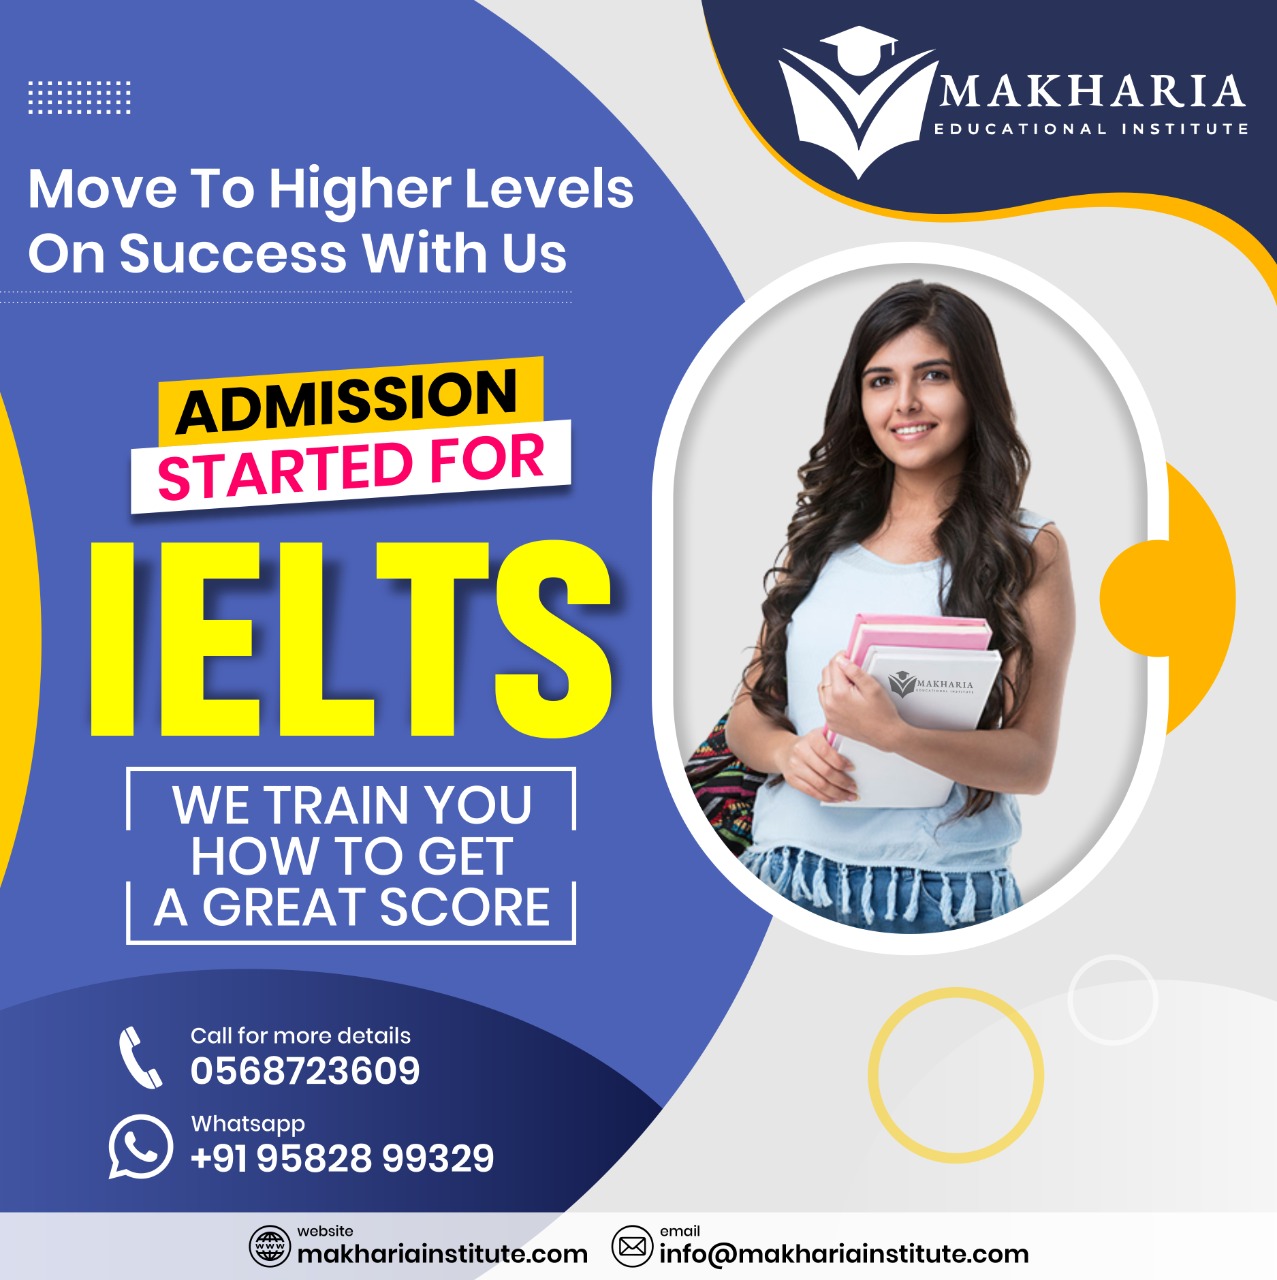 Get the best IELTS course from MAKHARIA institute -0568723609